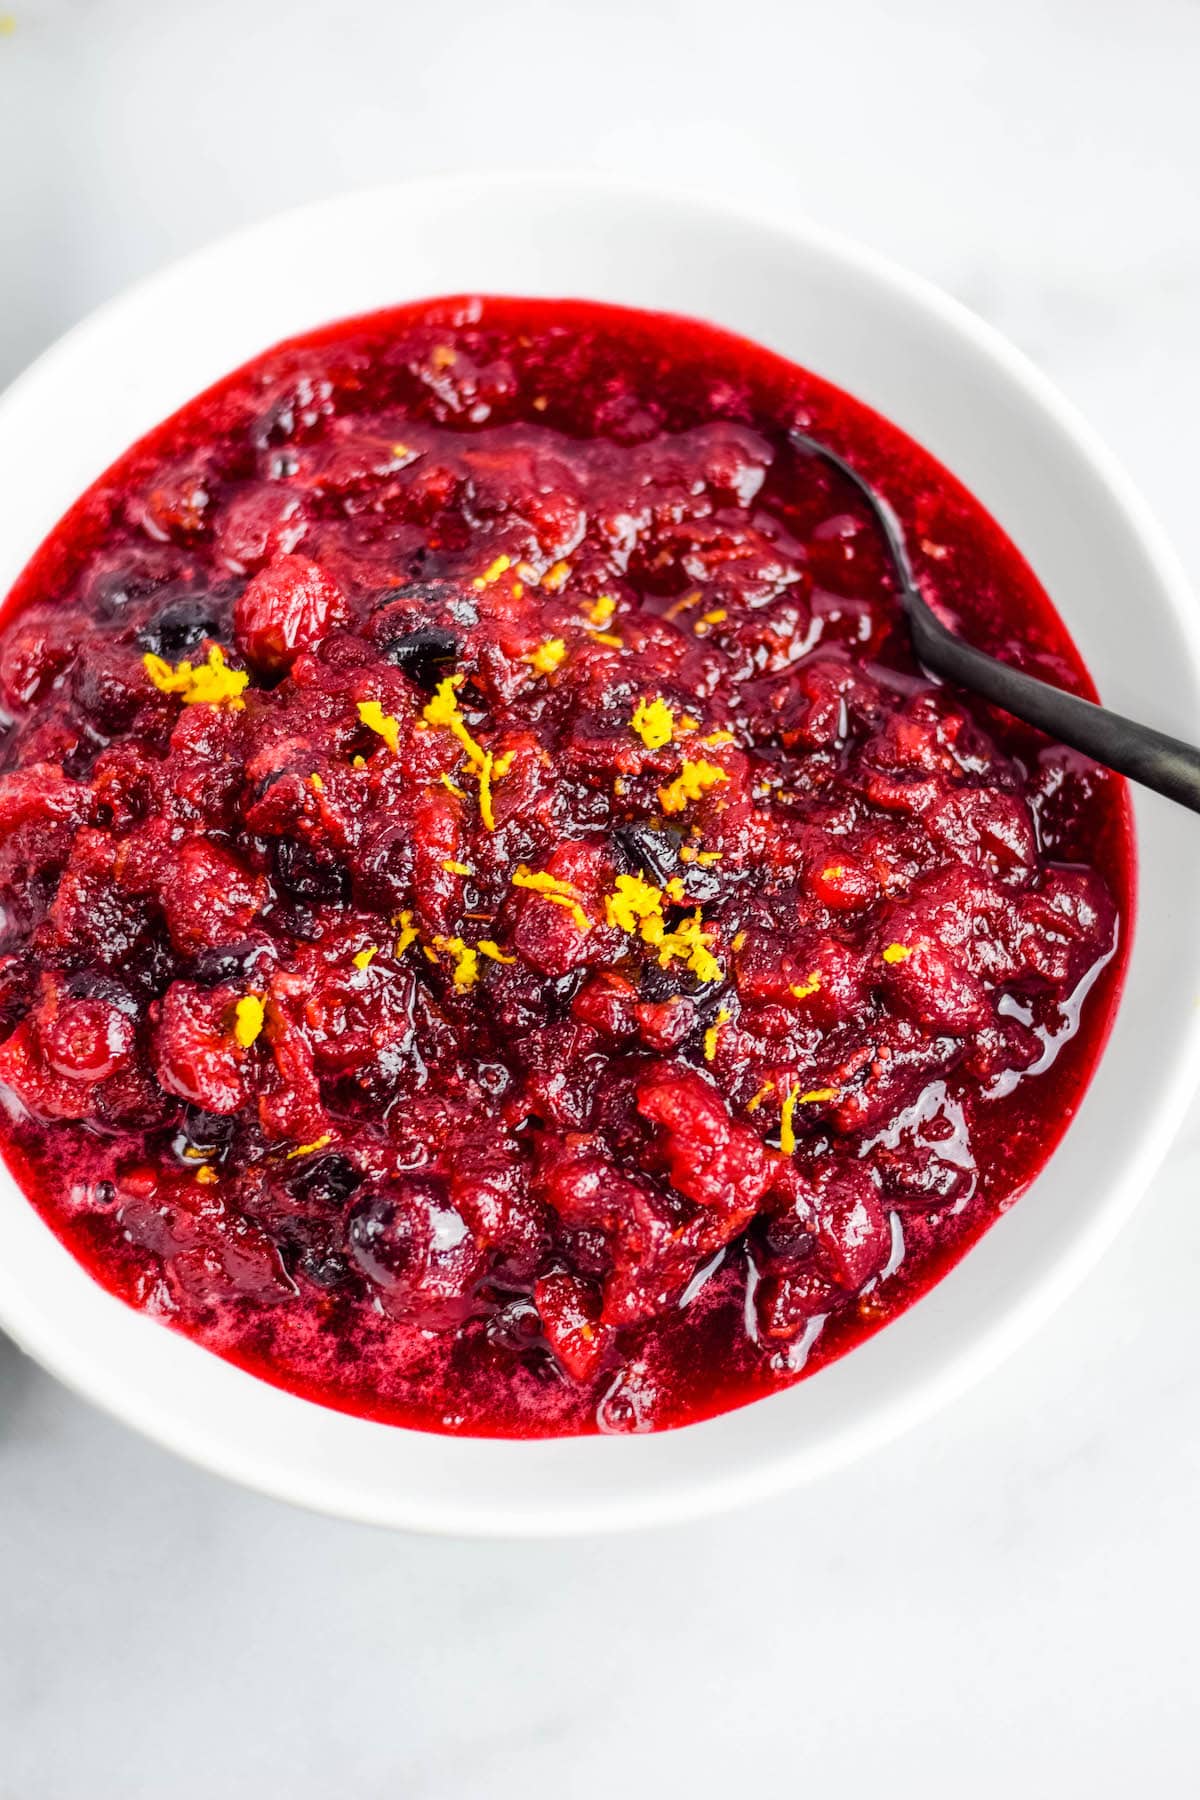 Naturally Sweetened Cranberry Sauce